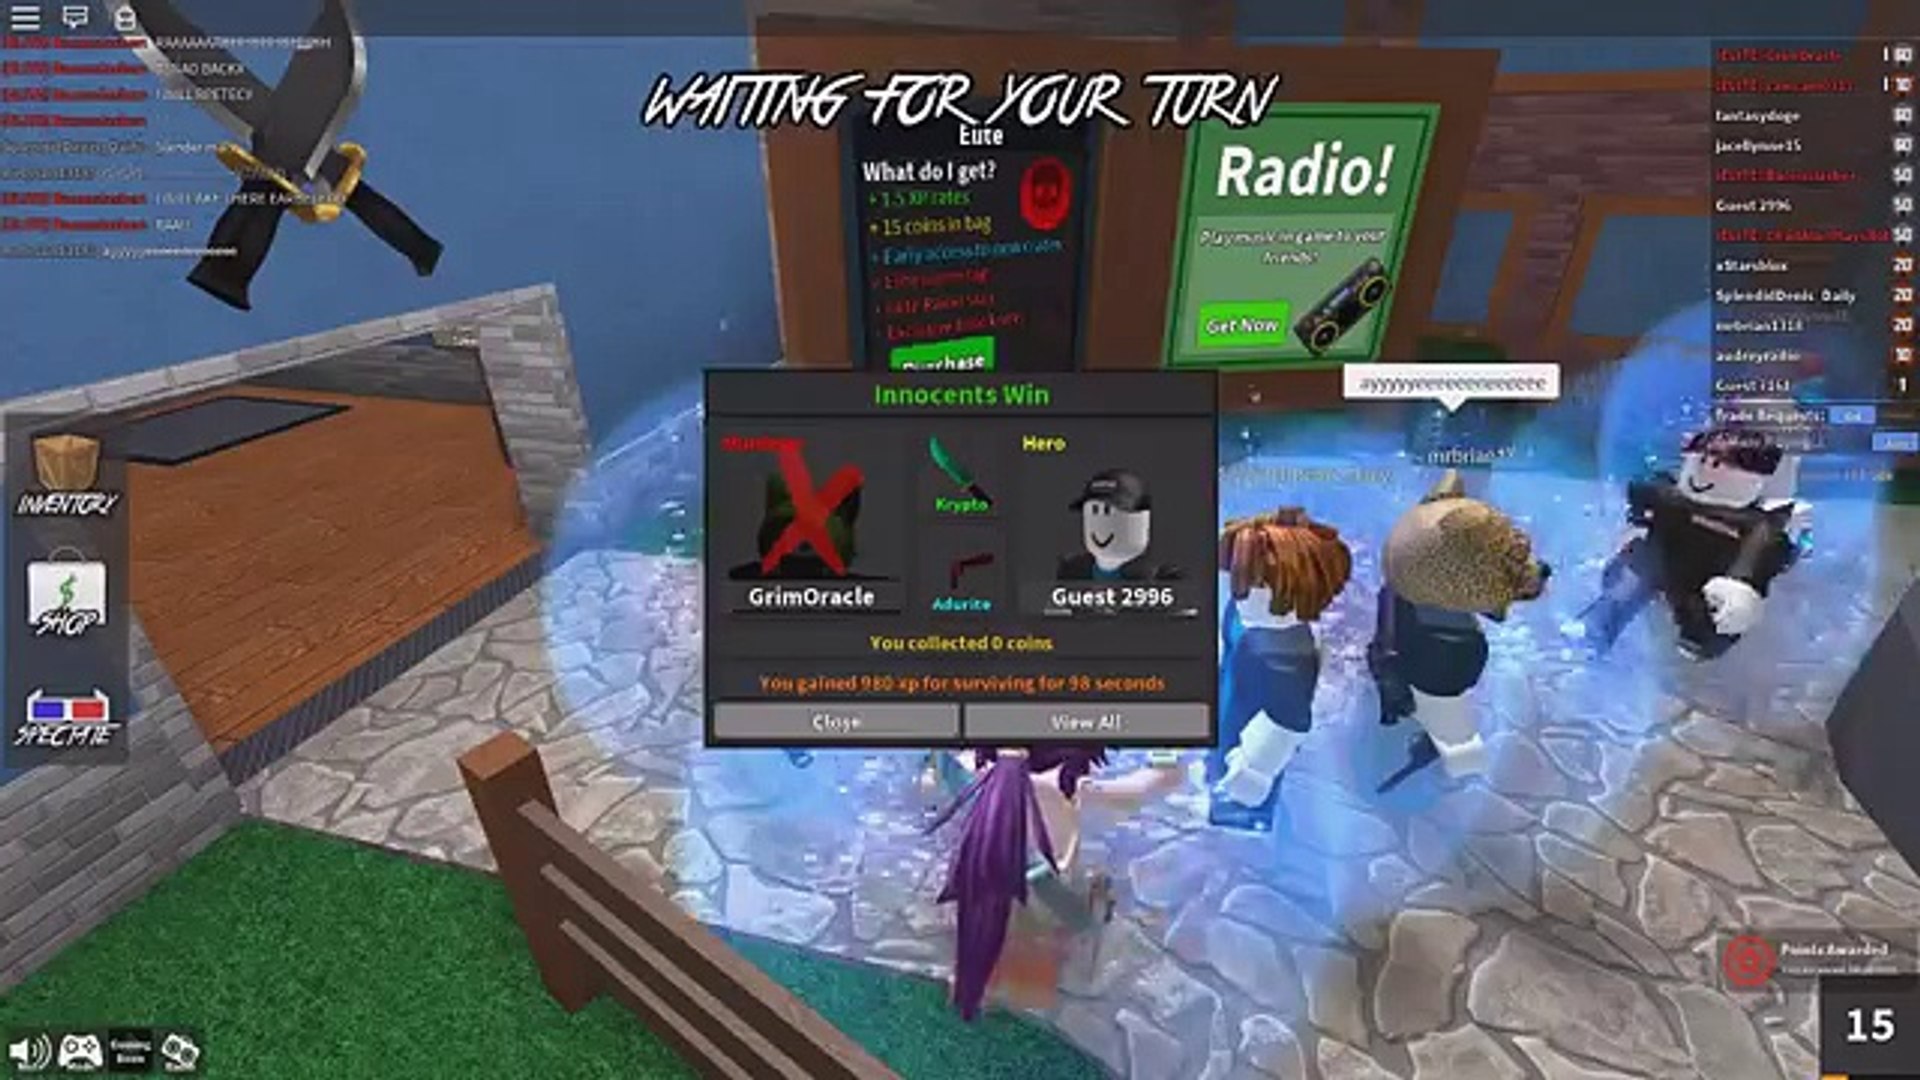 Roblox Lets Play Murder Mystery 2 Radiojh Games Gamer Chad Slg 2020 - roblox lets play escape the xbox obby radiojh games